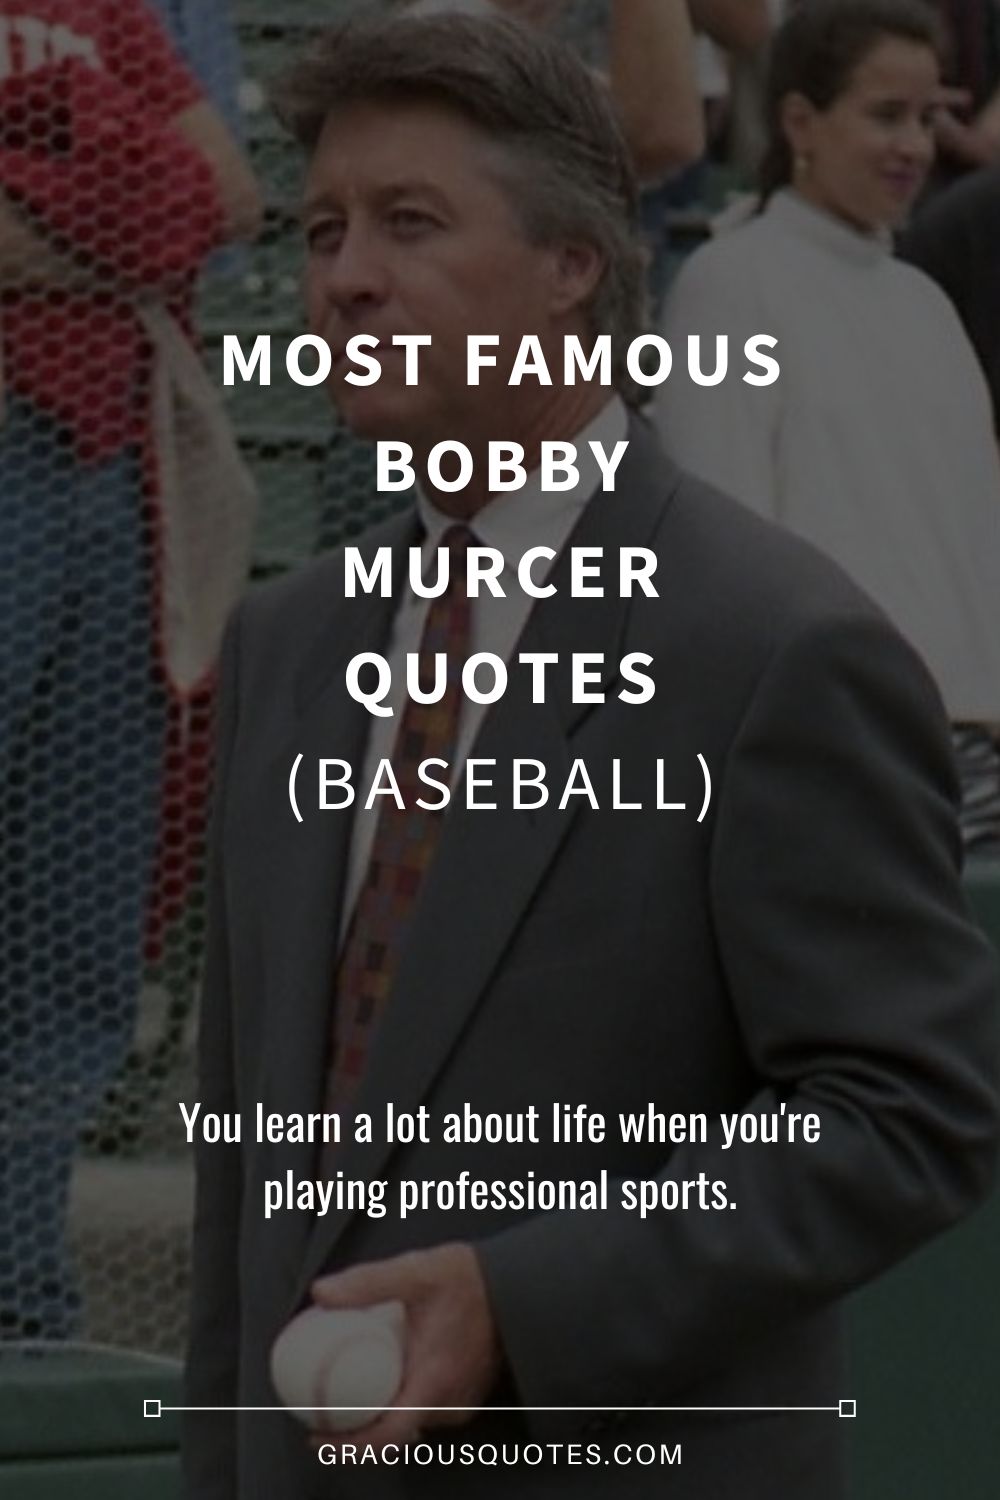 Most Famous Bobby Murcer Quotes (BASEBALL) - Gracious Quotes